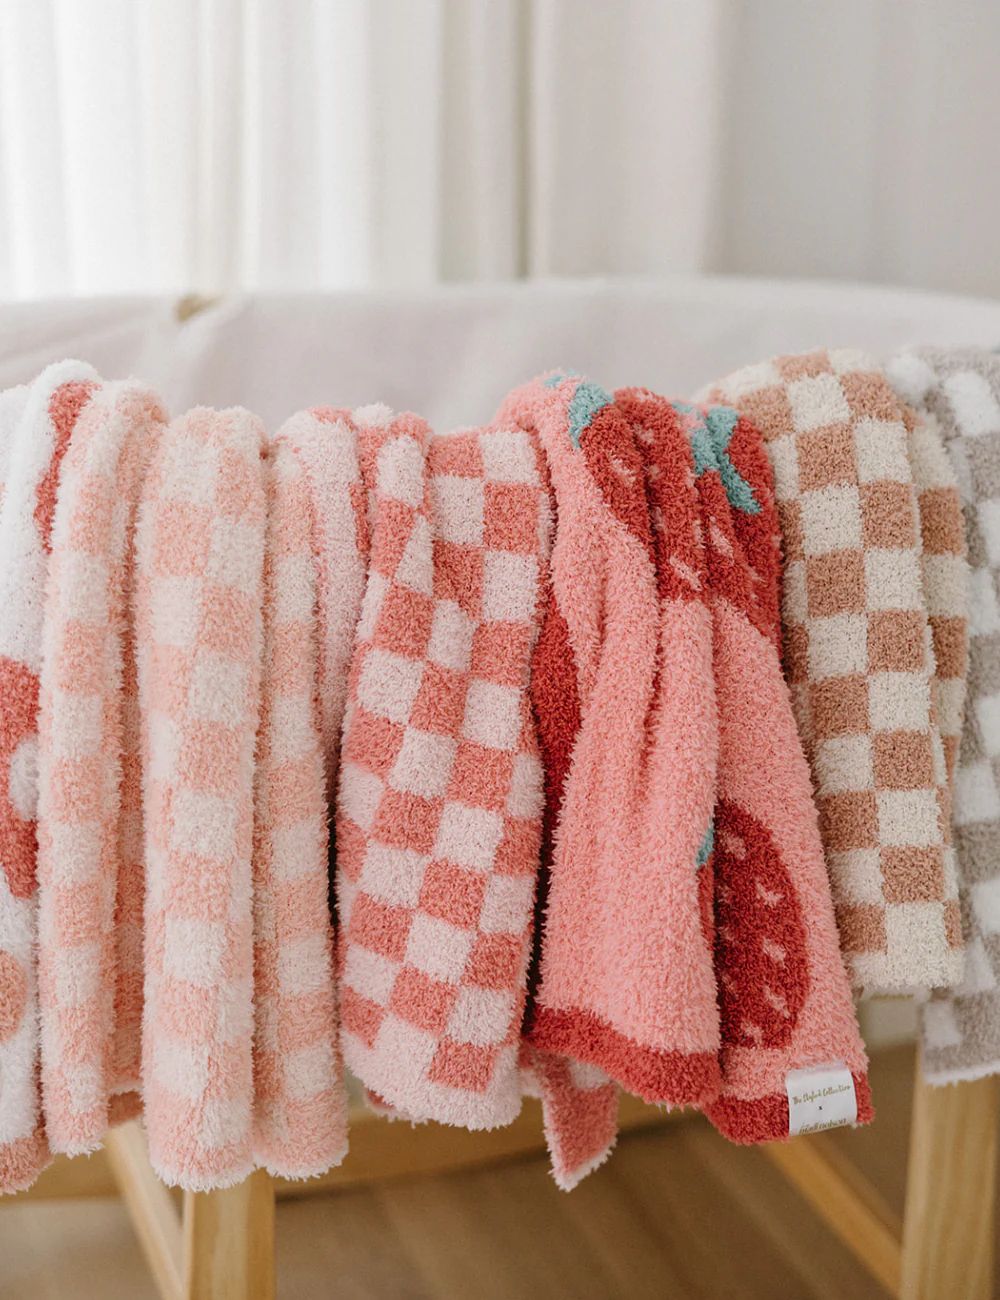 TSC x Madi Nelson: Strawberries Buttery Blanket | The Styled Collection